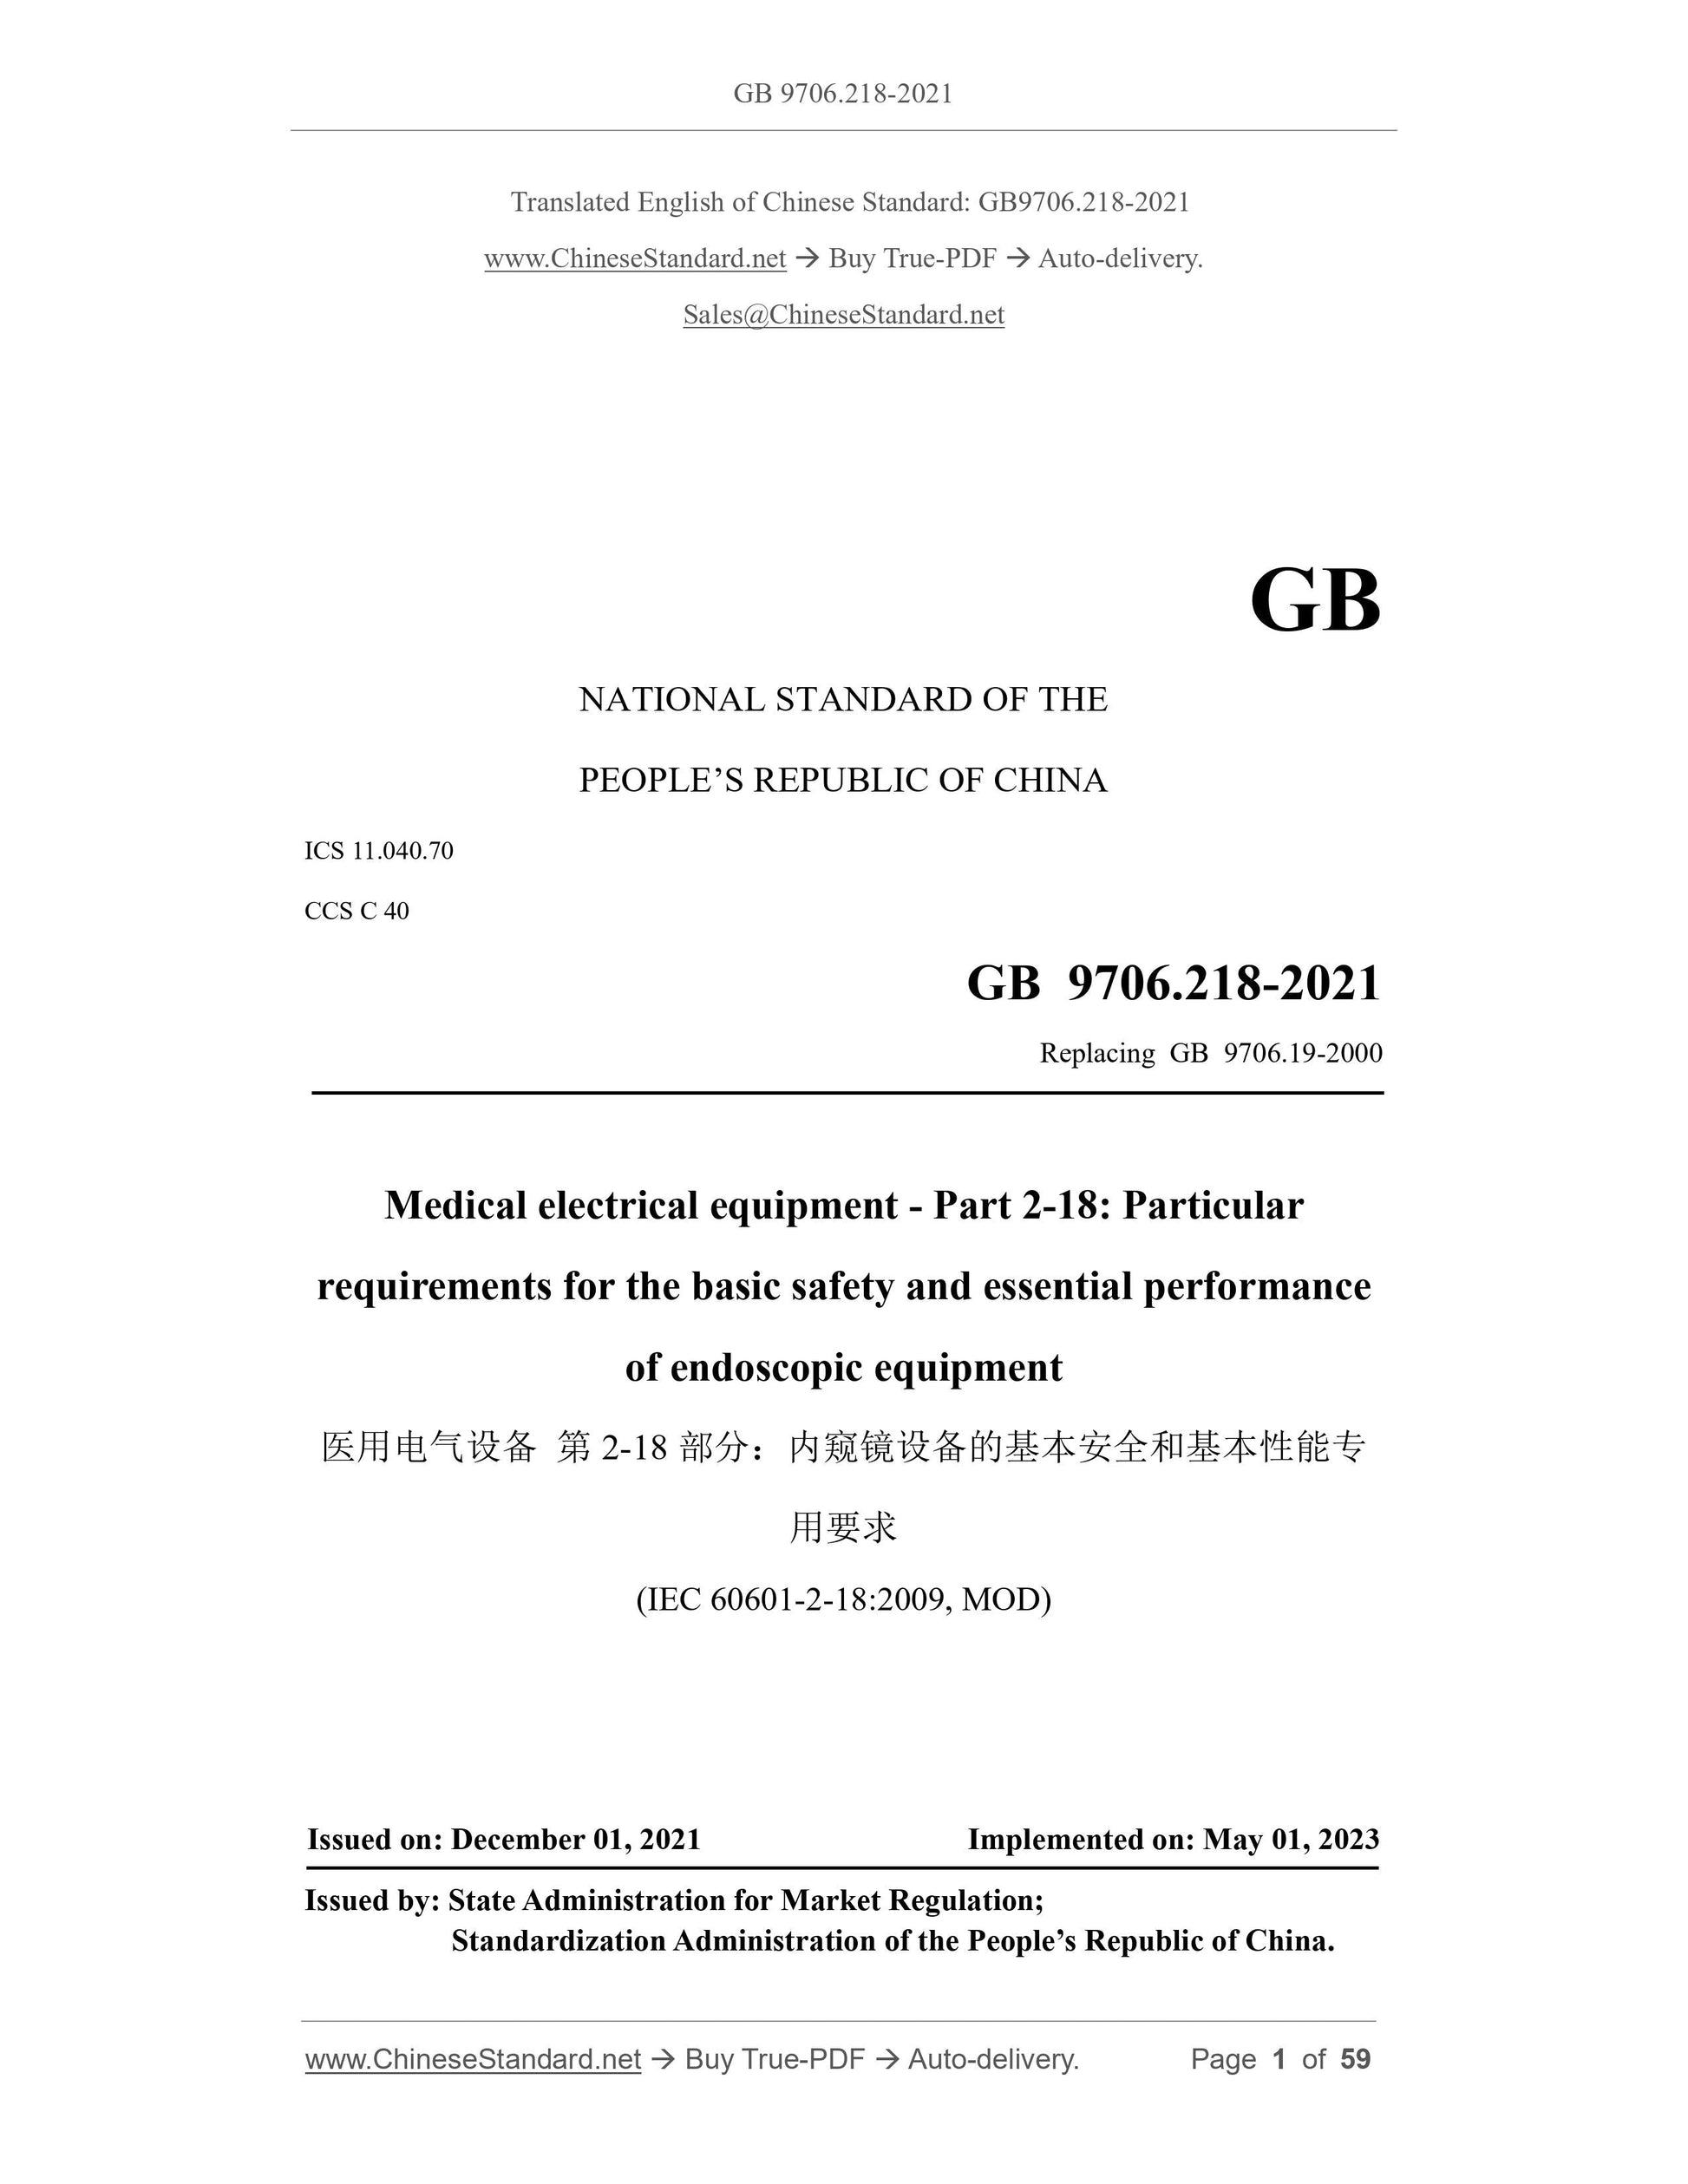 GB 9706.218-2021 Page 1